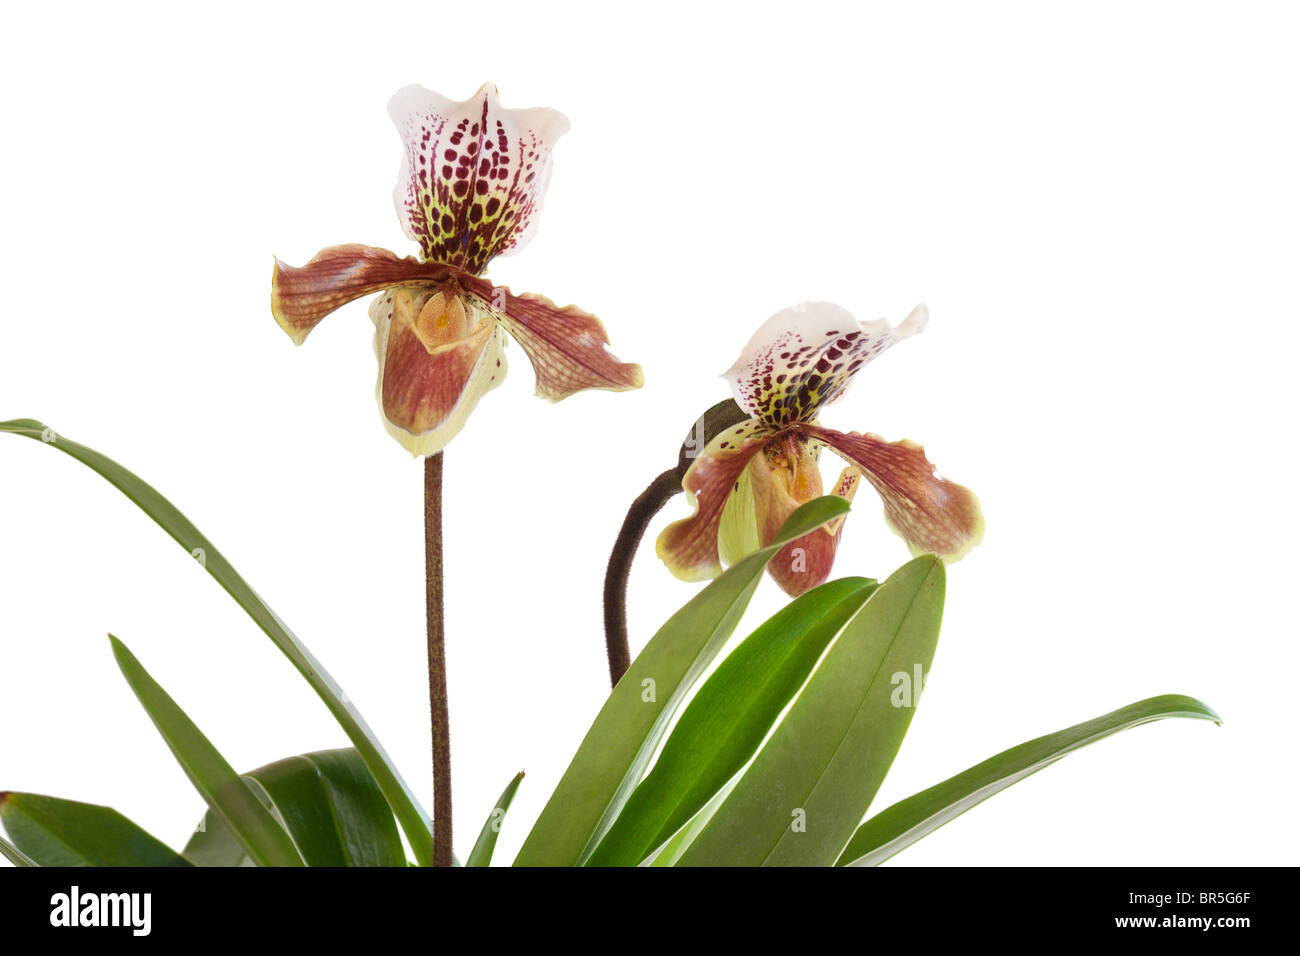 Paphiopedilum Lady Slipper Orchid against a black background Stock Photo